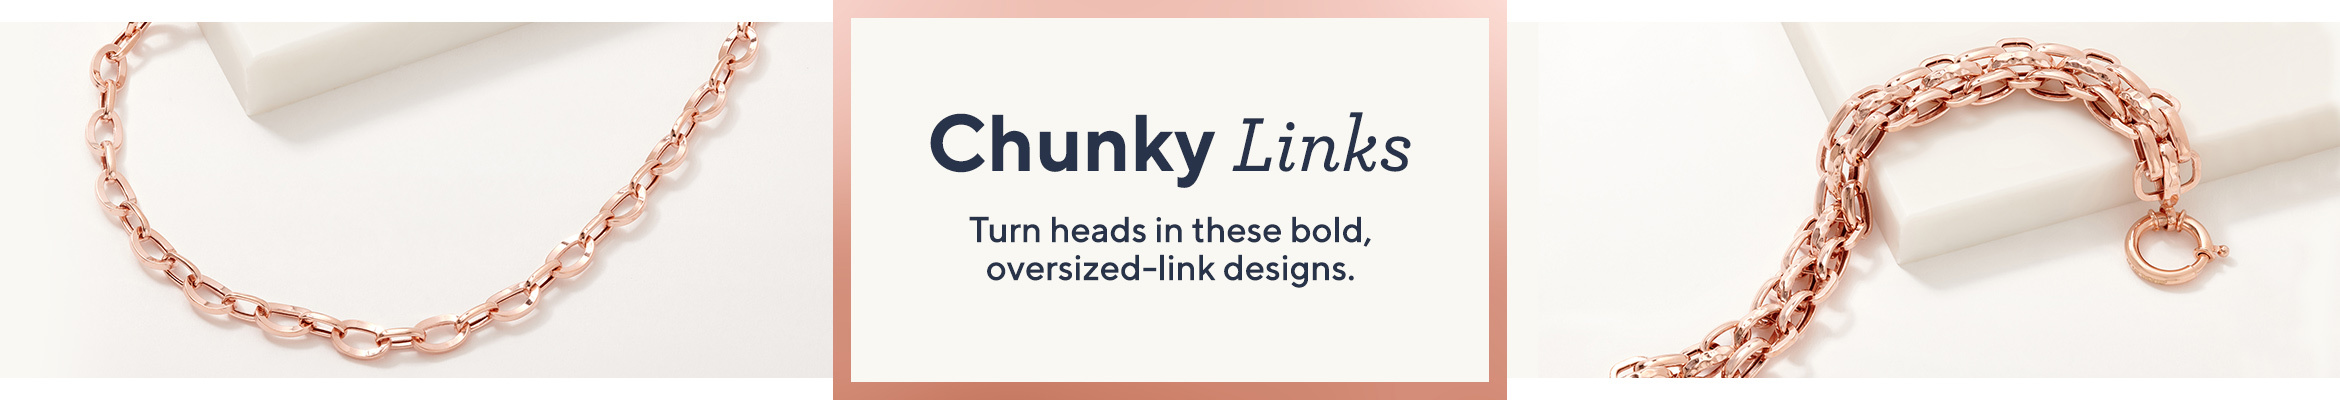 Chunky Links  Turn heads in these bold, oversized-link designs.